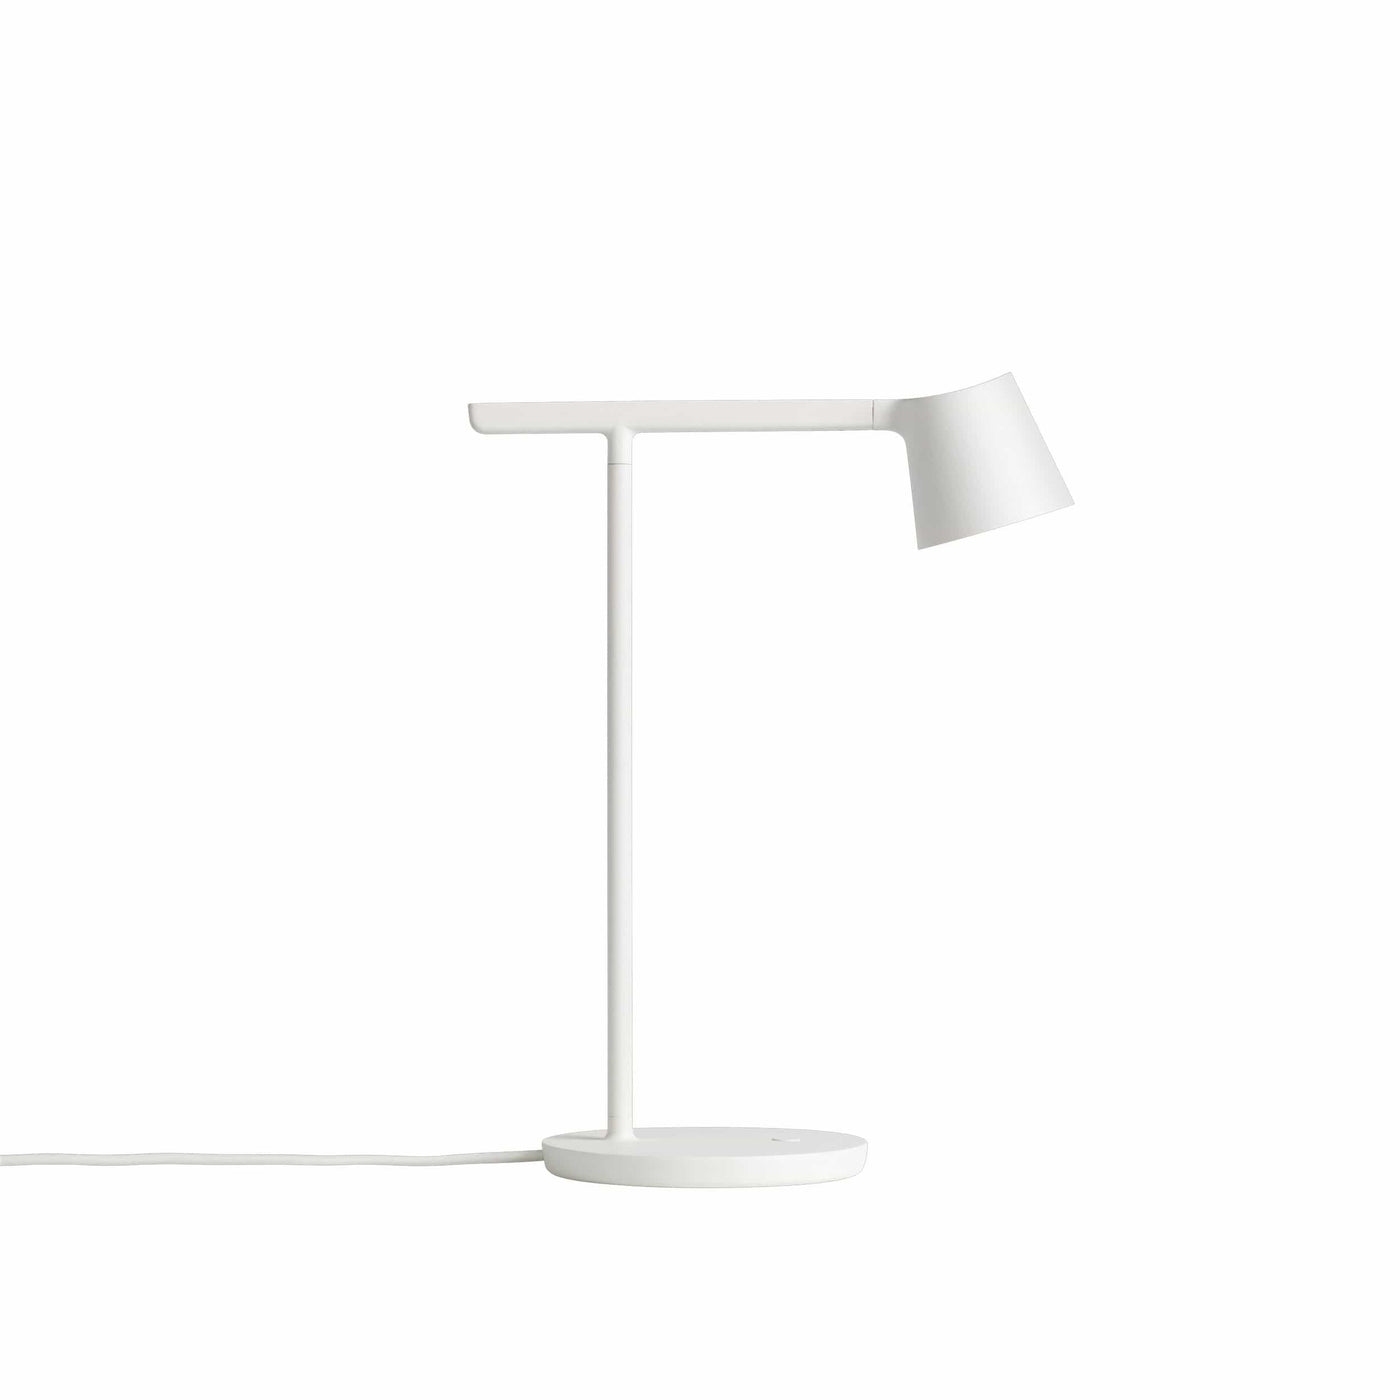 muuto tip table lamp white by Jens Fager available at someday designs. #colour_white